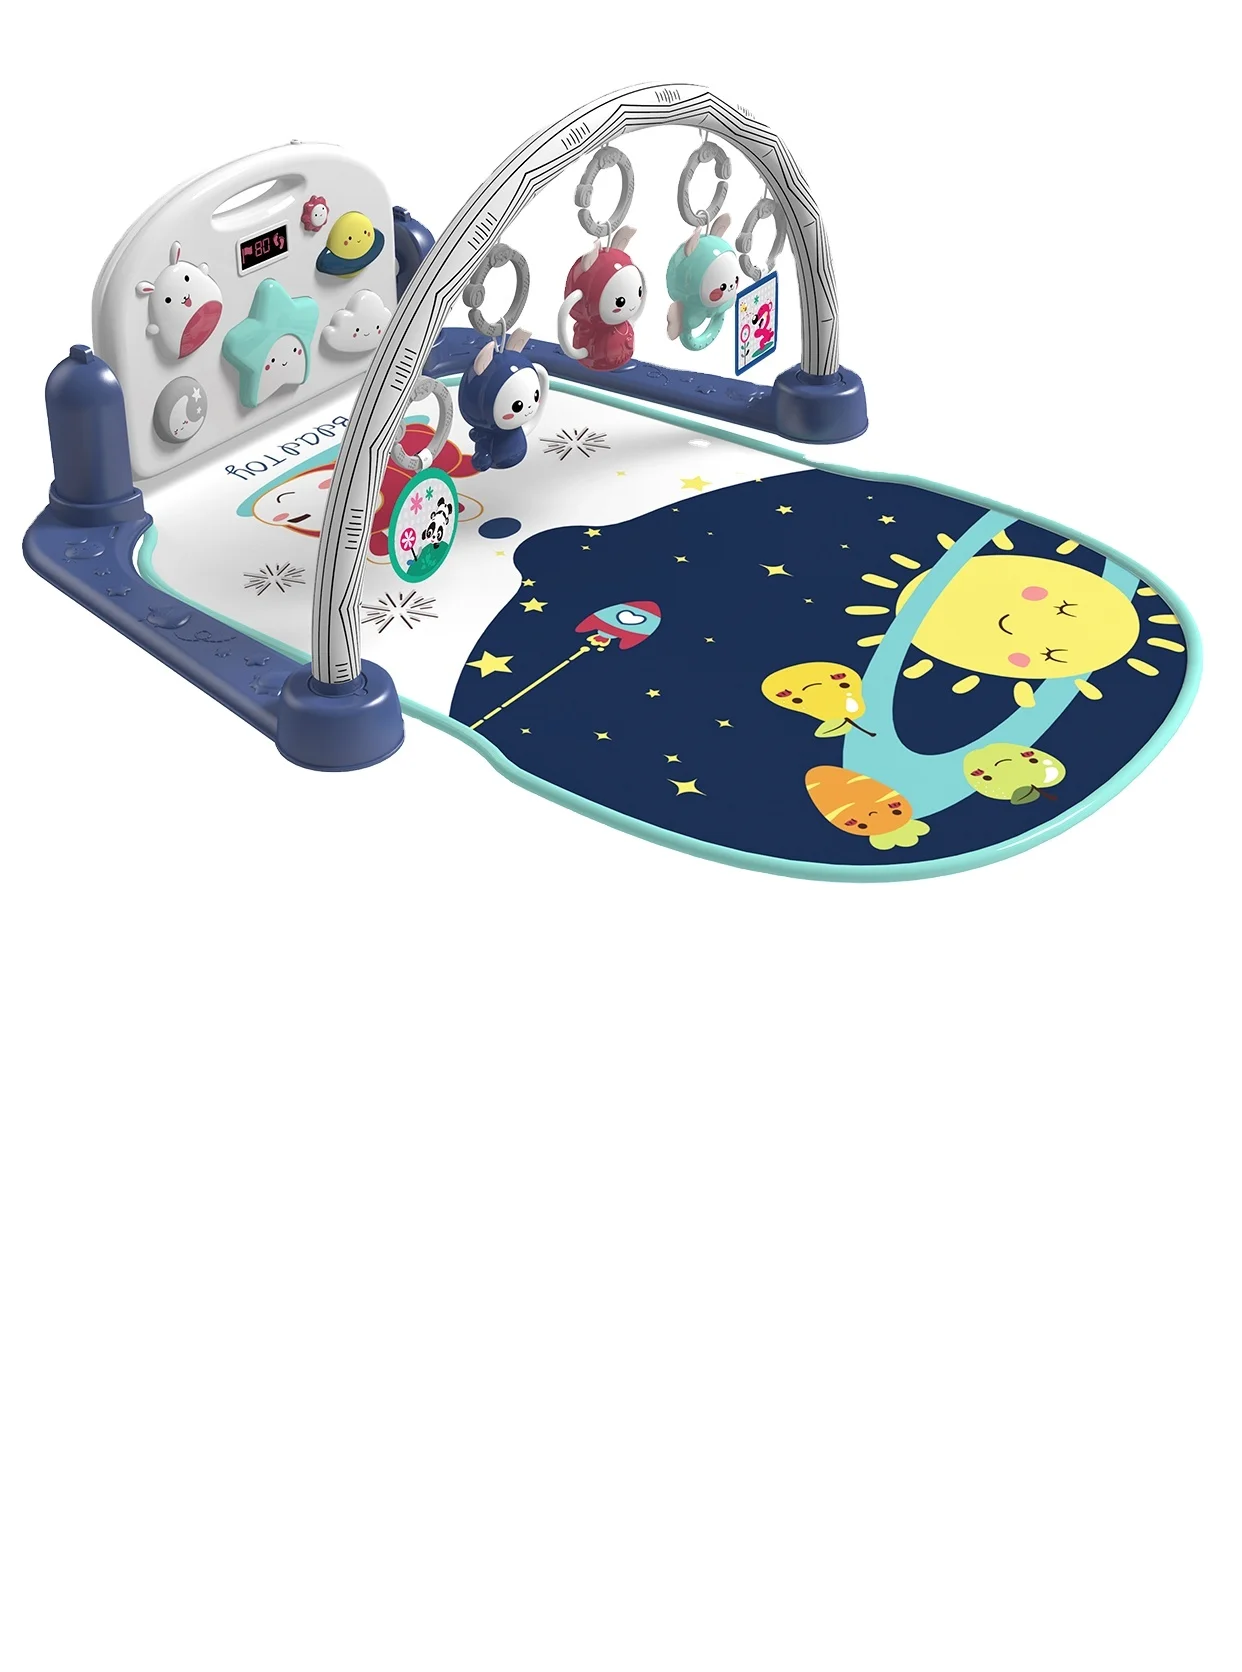 Fuying Wholesale educational soft gym carpet musical playmat activity baby piano mat